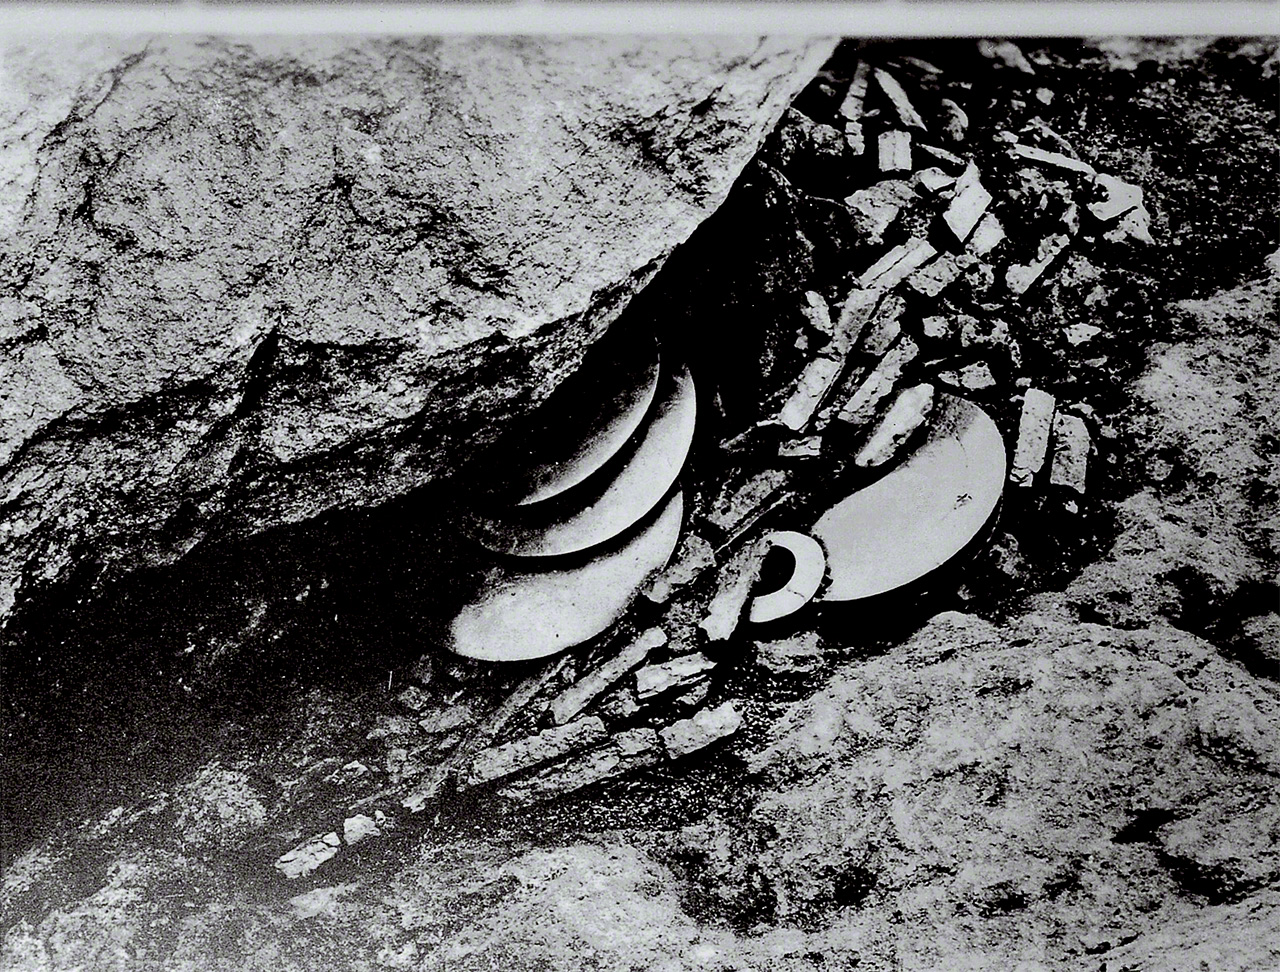 Artifacts unearthed at Site 17. Twenty-one mirrors facing upward and stacked atop one another were placed in a rock crevice. (Courtesy of Munakata Taisha)